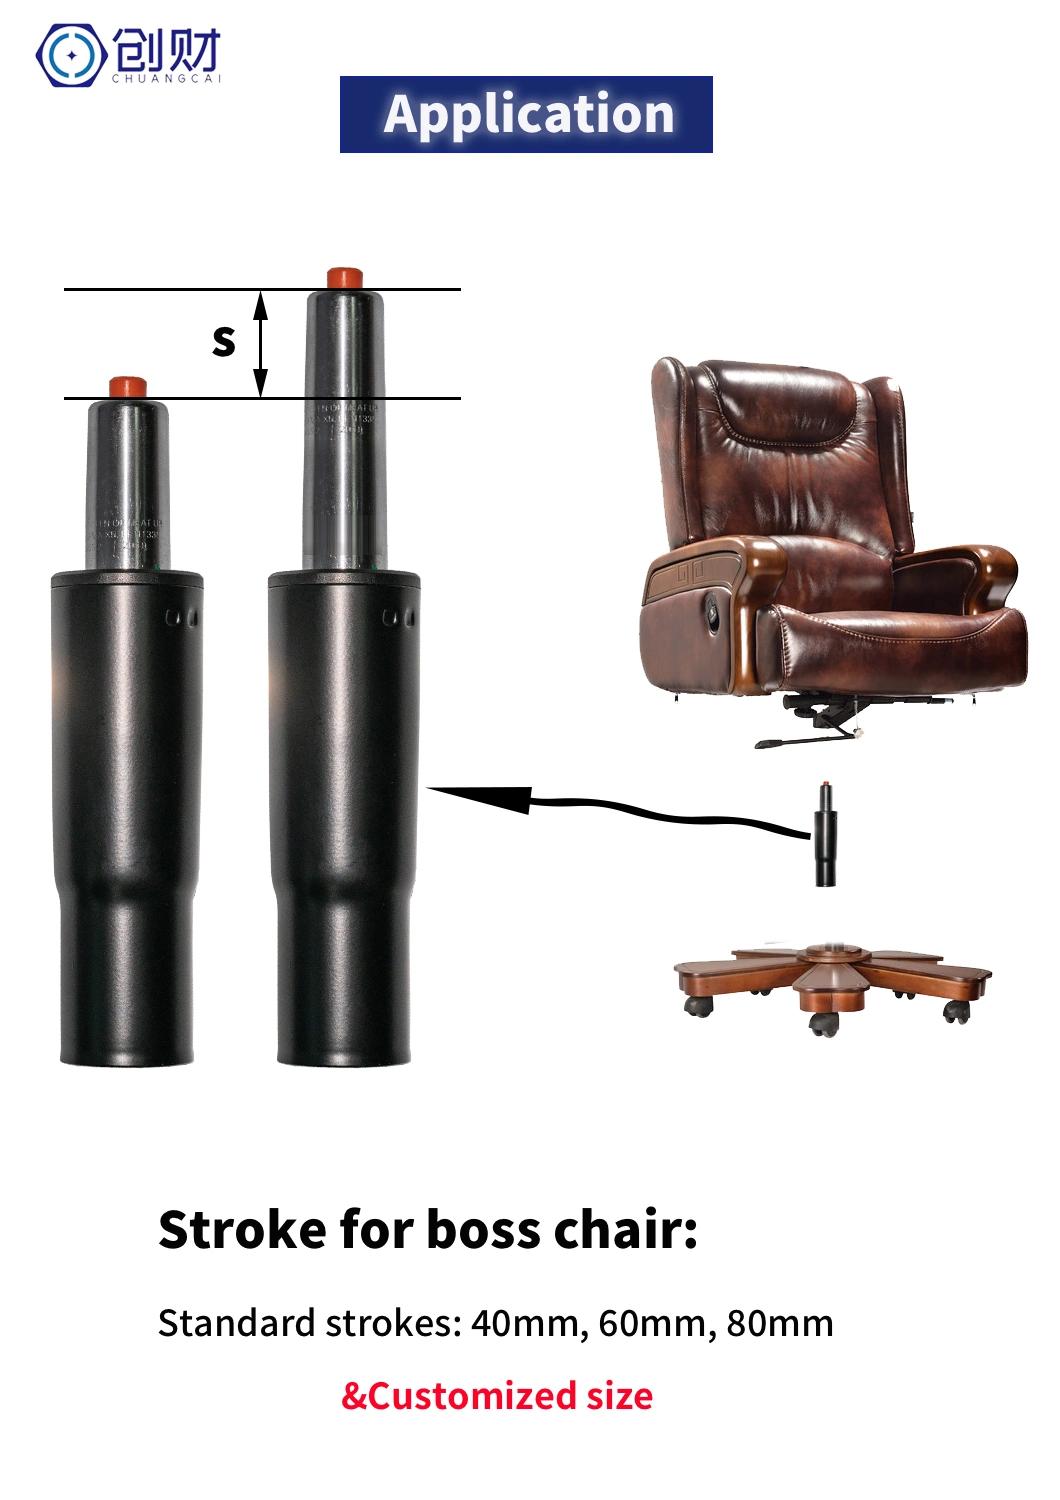 High Quality Competitive Price Office Chair Gas Lift of Office Chair Parts in Zhejiang